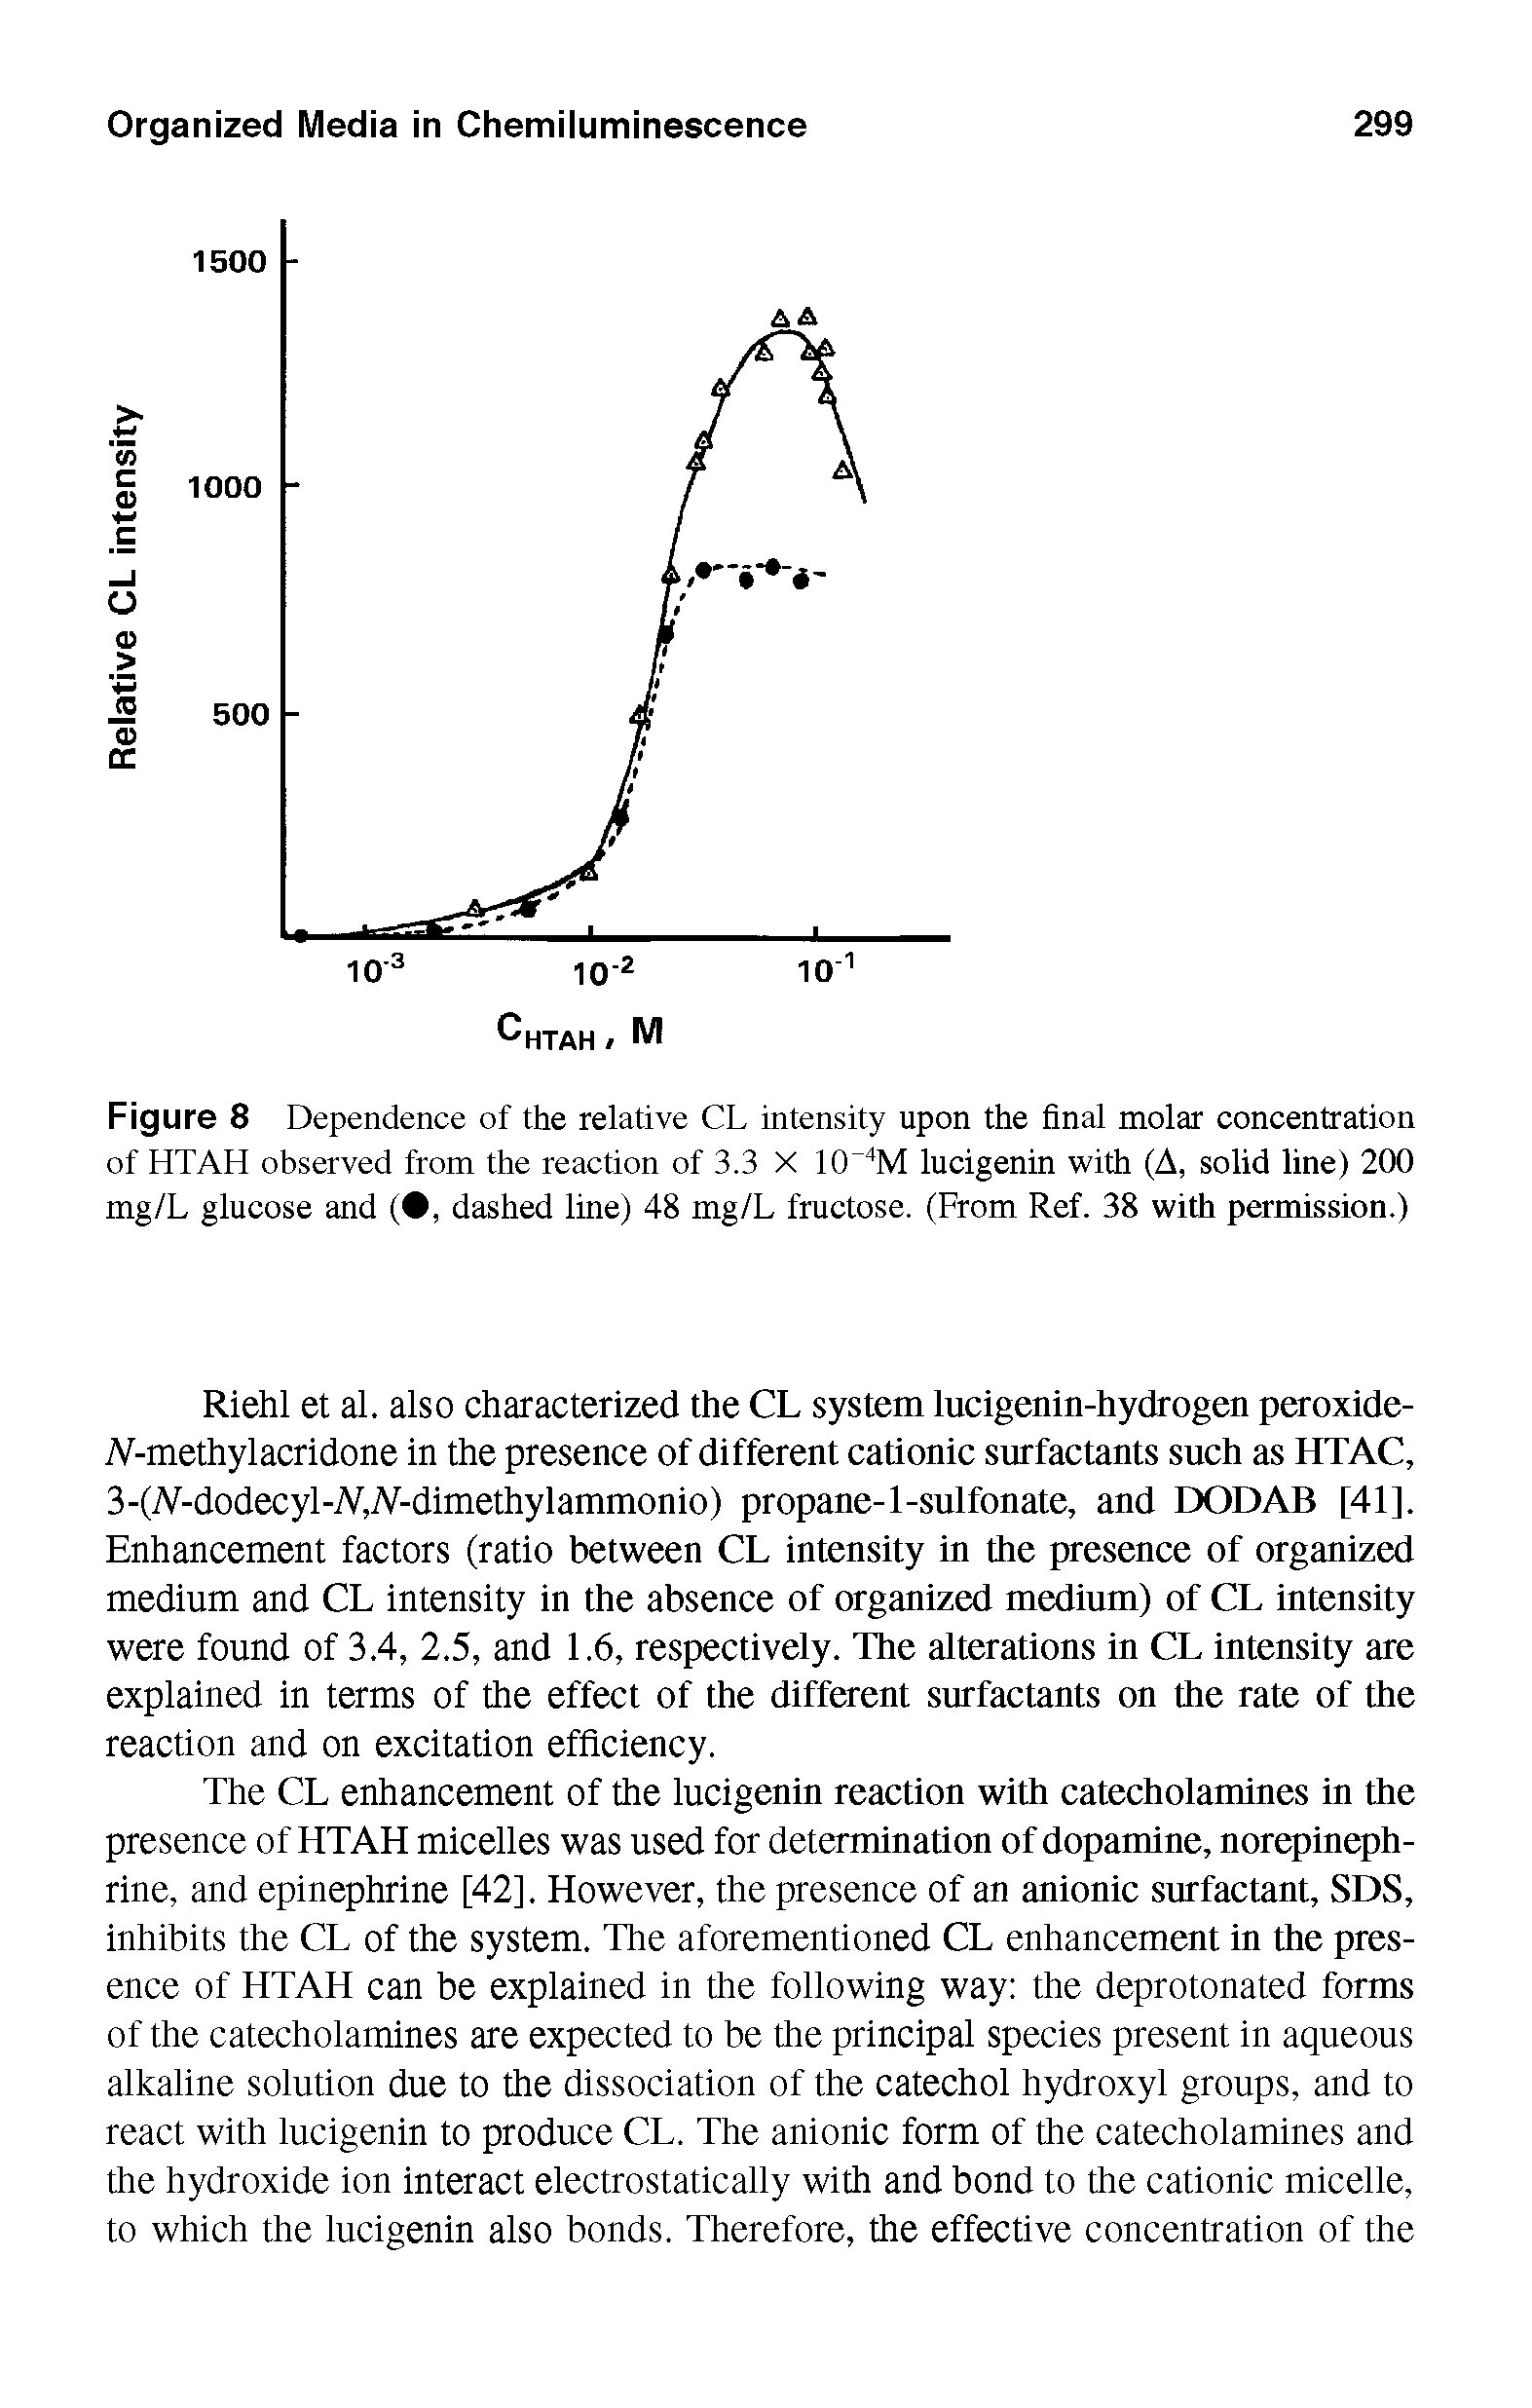 Figure 8 Dependence of the relative CL intensity upon the final molar concentration of HTAH observed from the reaction of 3.3 X 1CT4M lucigenin with (A, solid line) 200 mg/L glucose and ( , dashed line) 48 mg/L fructose. (From Ref. 38 with permission.)...